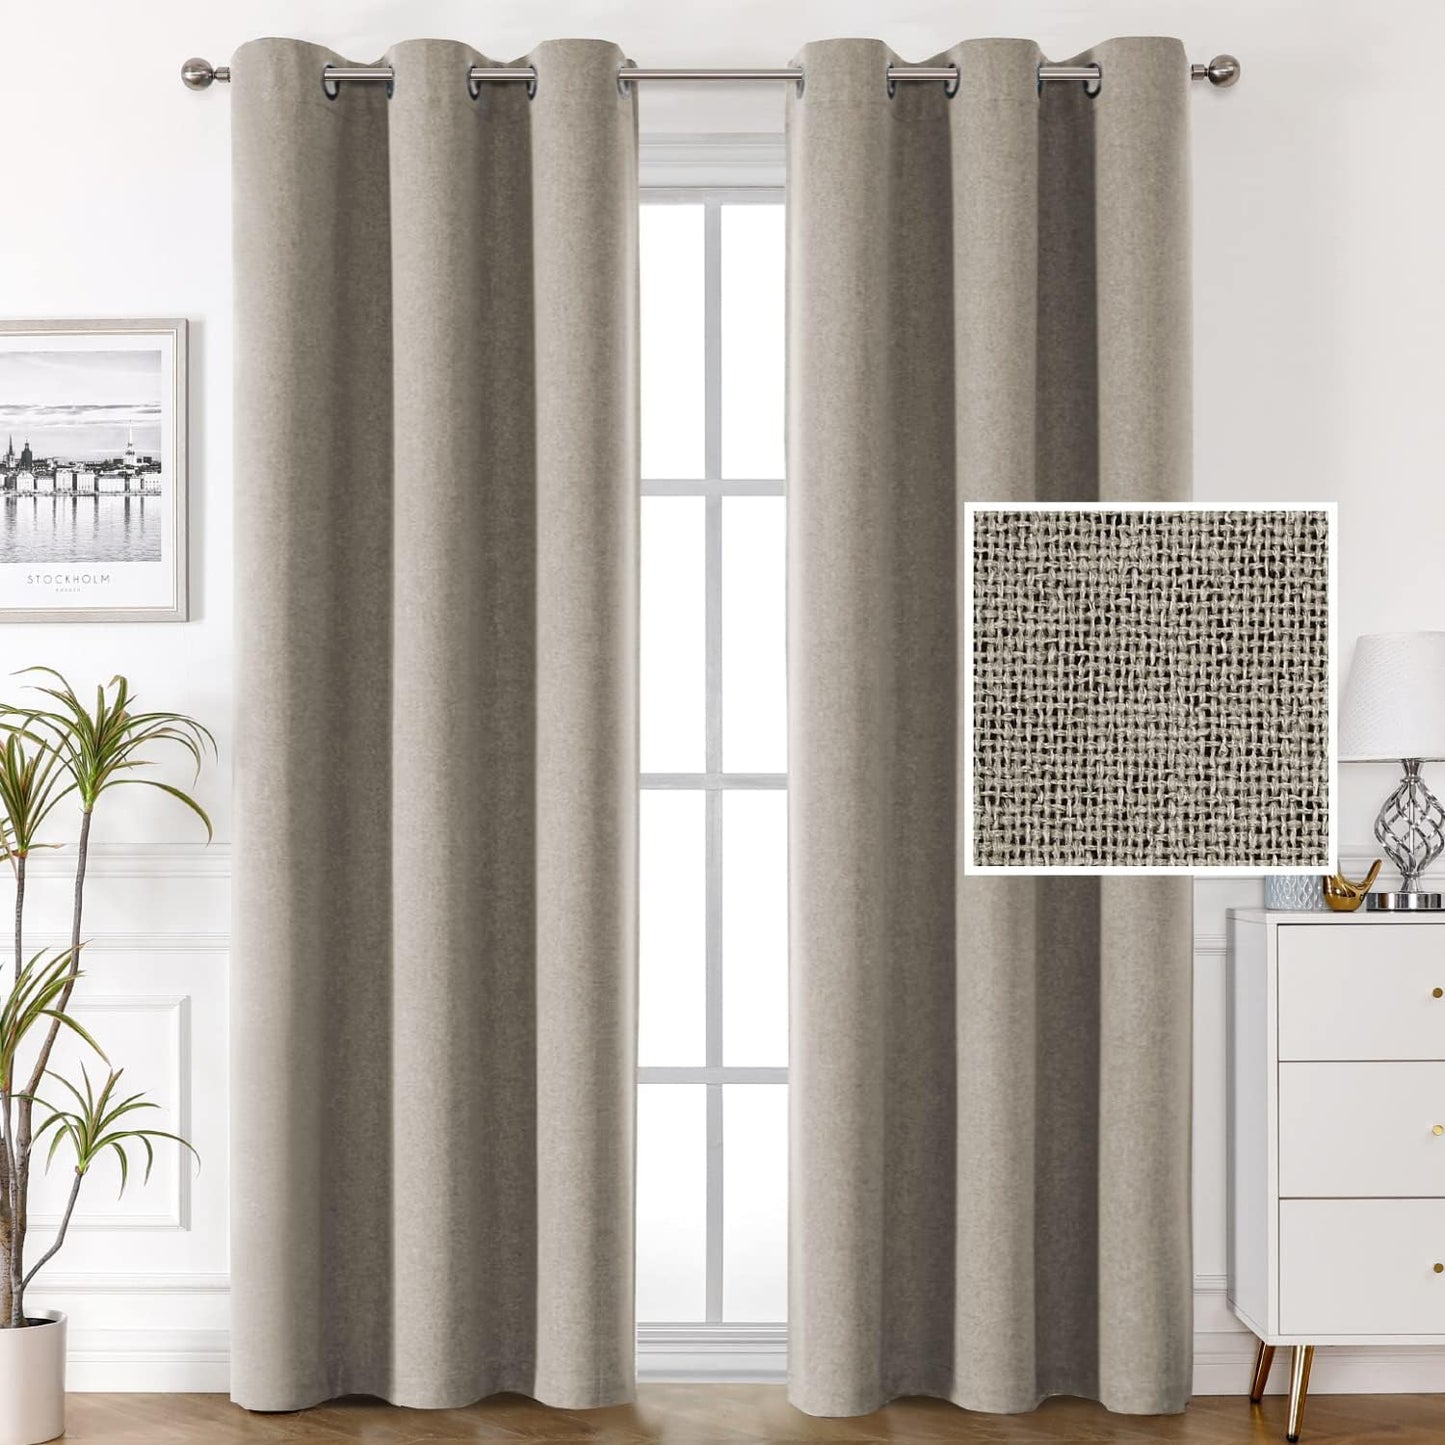 H.VERSAILTEX 100% Blackout Linen Look Curtains Thermal Insulated Curtains for Living Room Textured Burlap Drapes for Bedroom Grommet Linen Noise Blocking Curtains 42 X 84 Inch, 2 Panels - Sage  H.VERSAILTEX Taupe 42"W X 84"L 